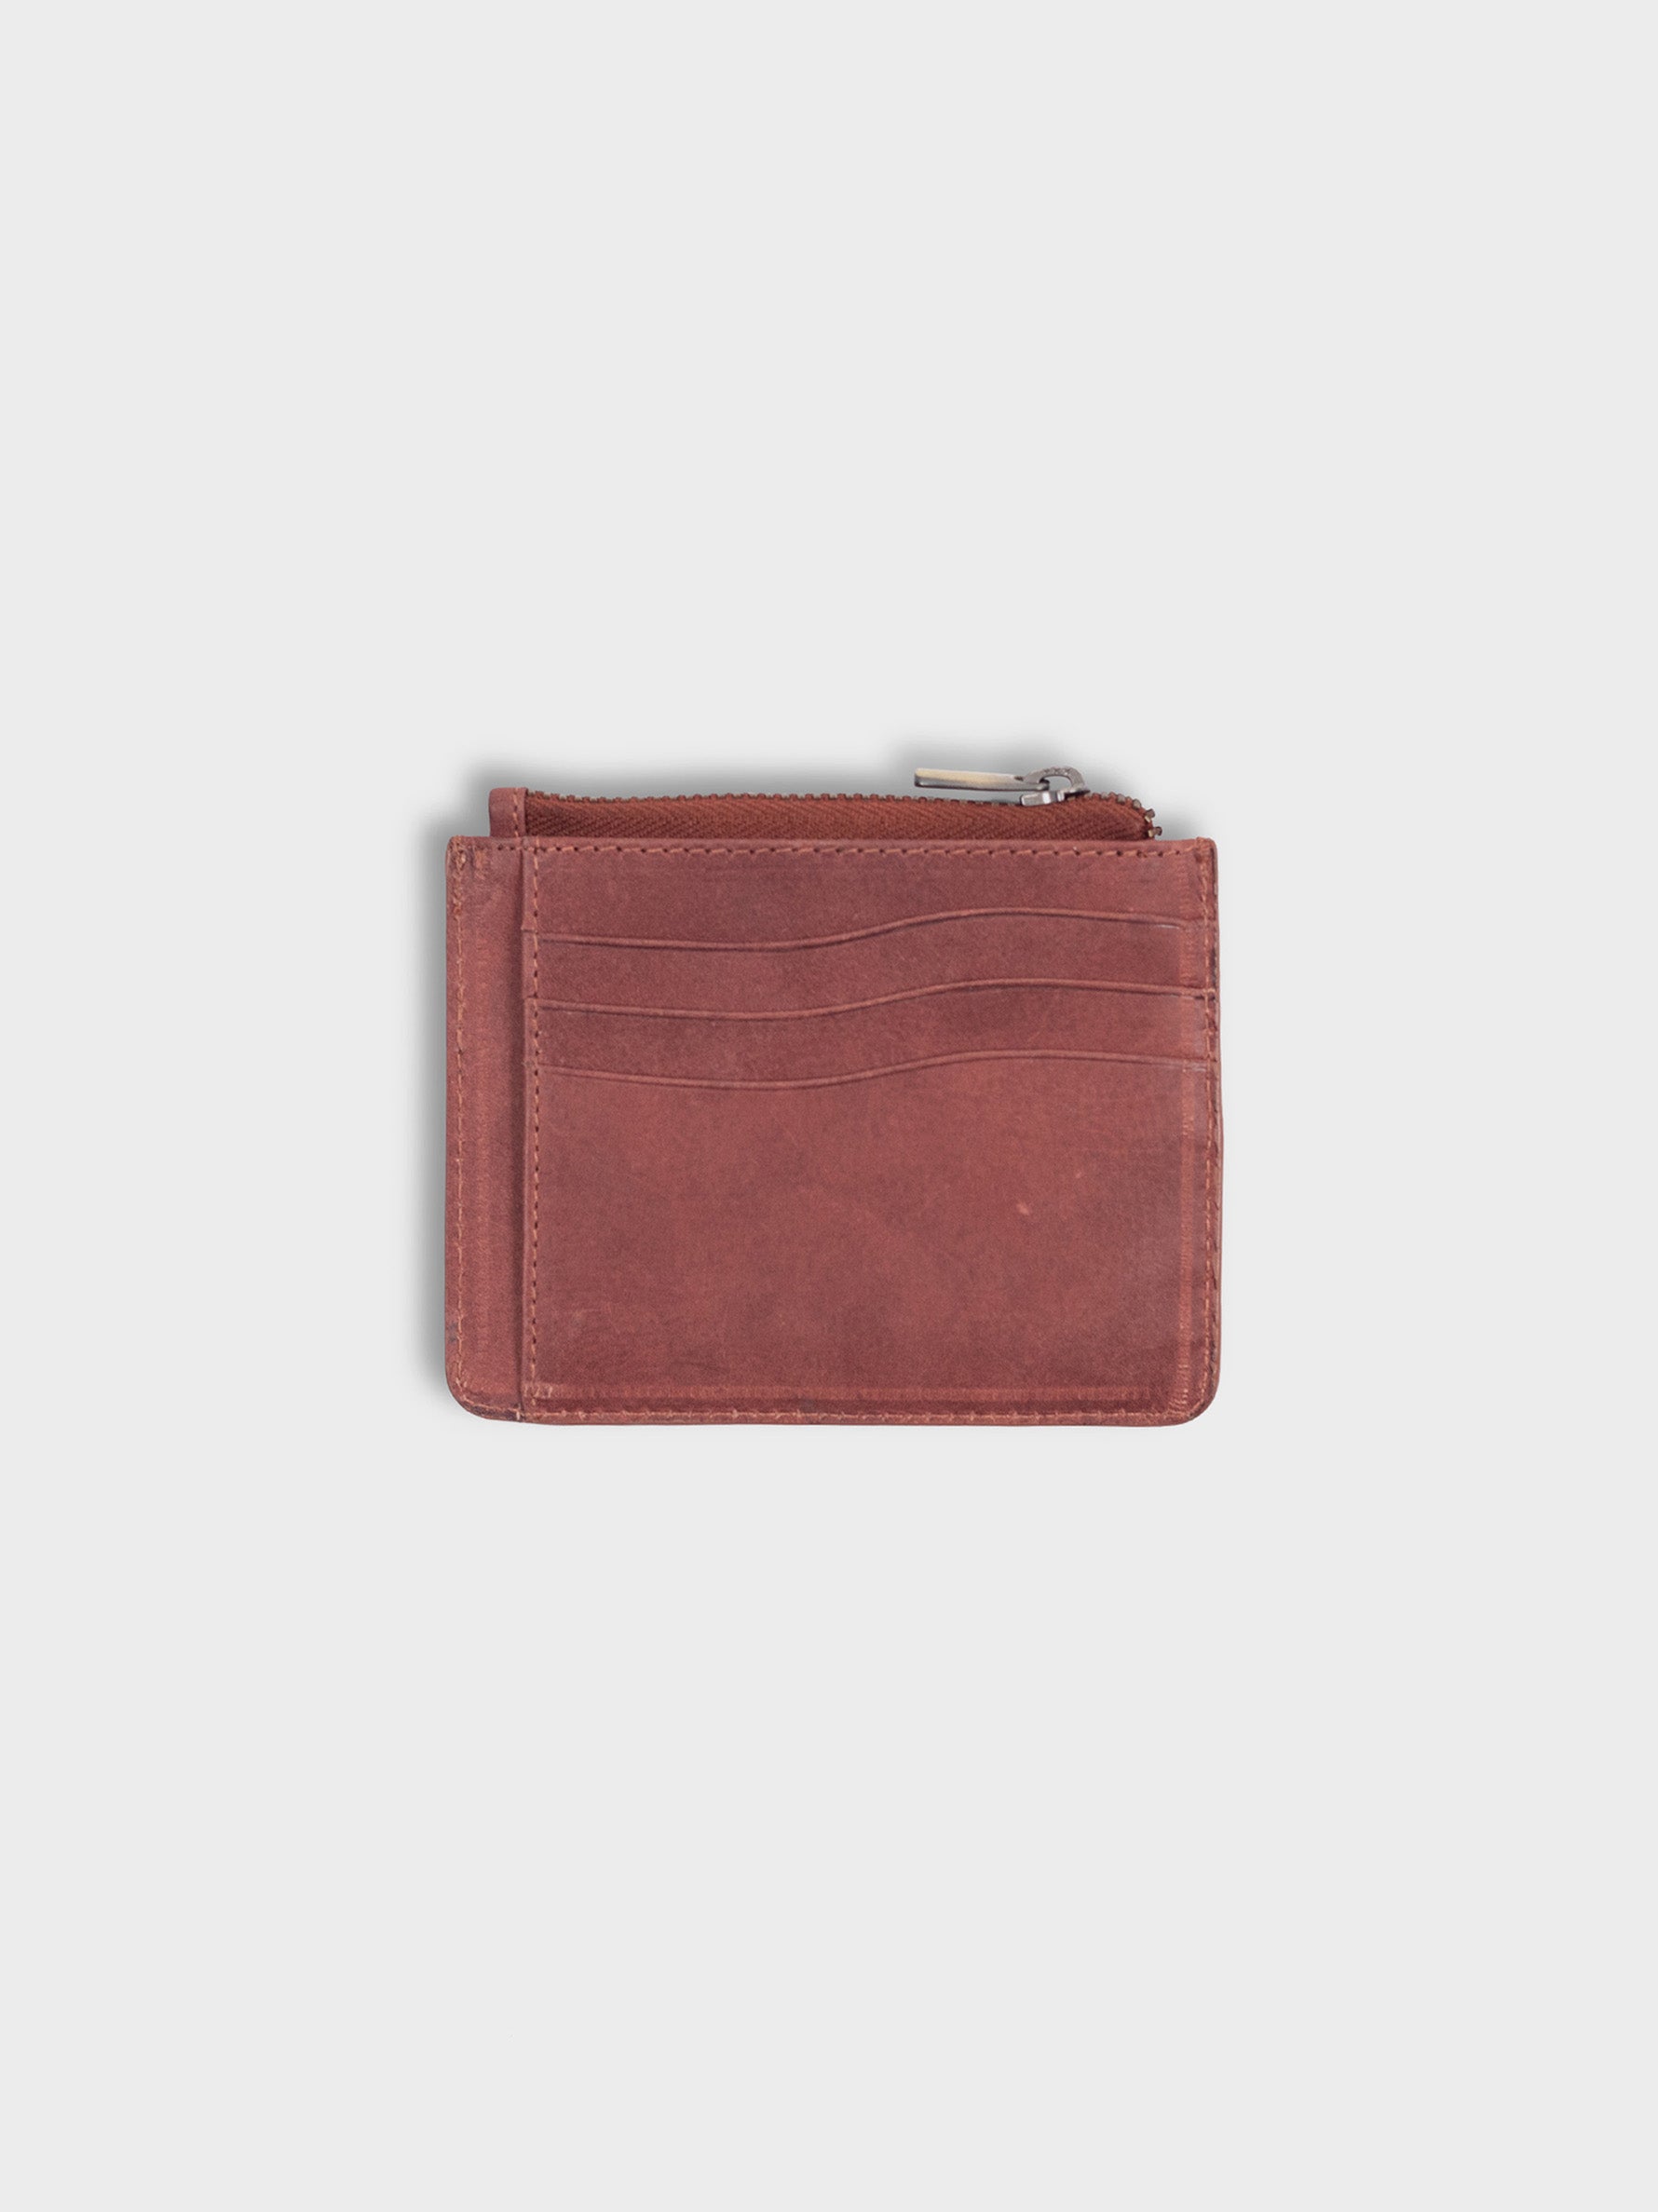 Premium Distressed Vegetable Tanned Leather Red Cardholder for Women Tan & Loom